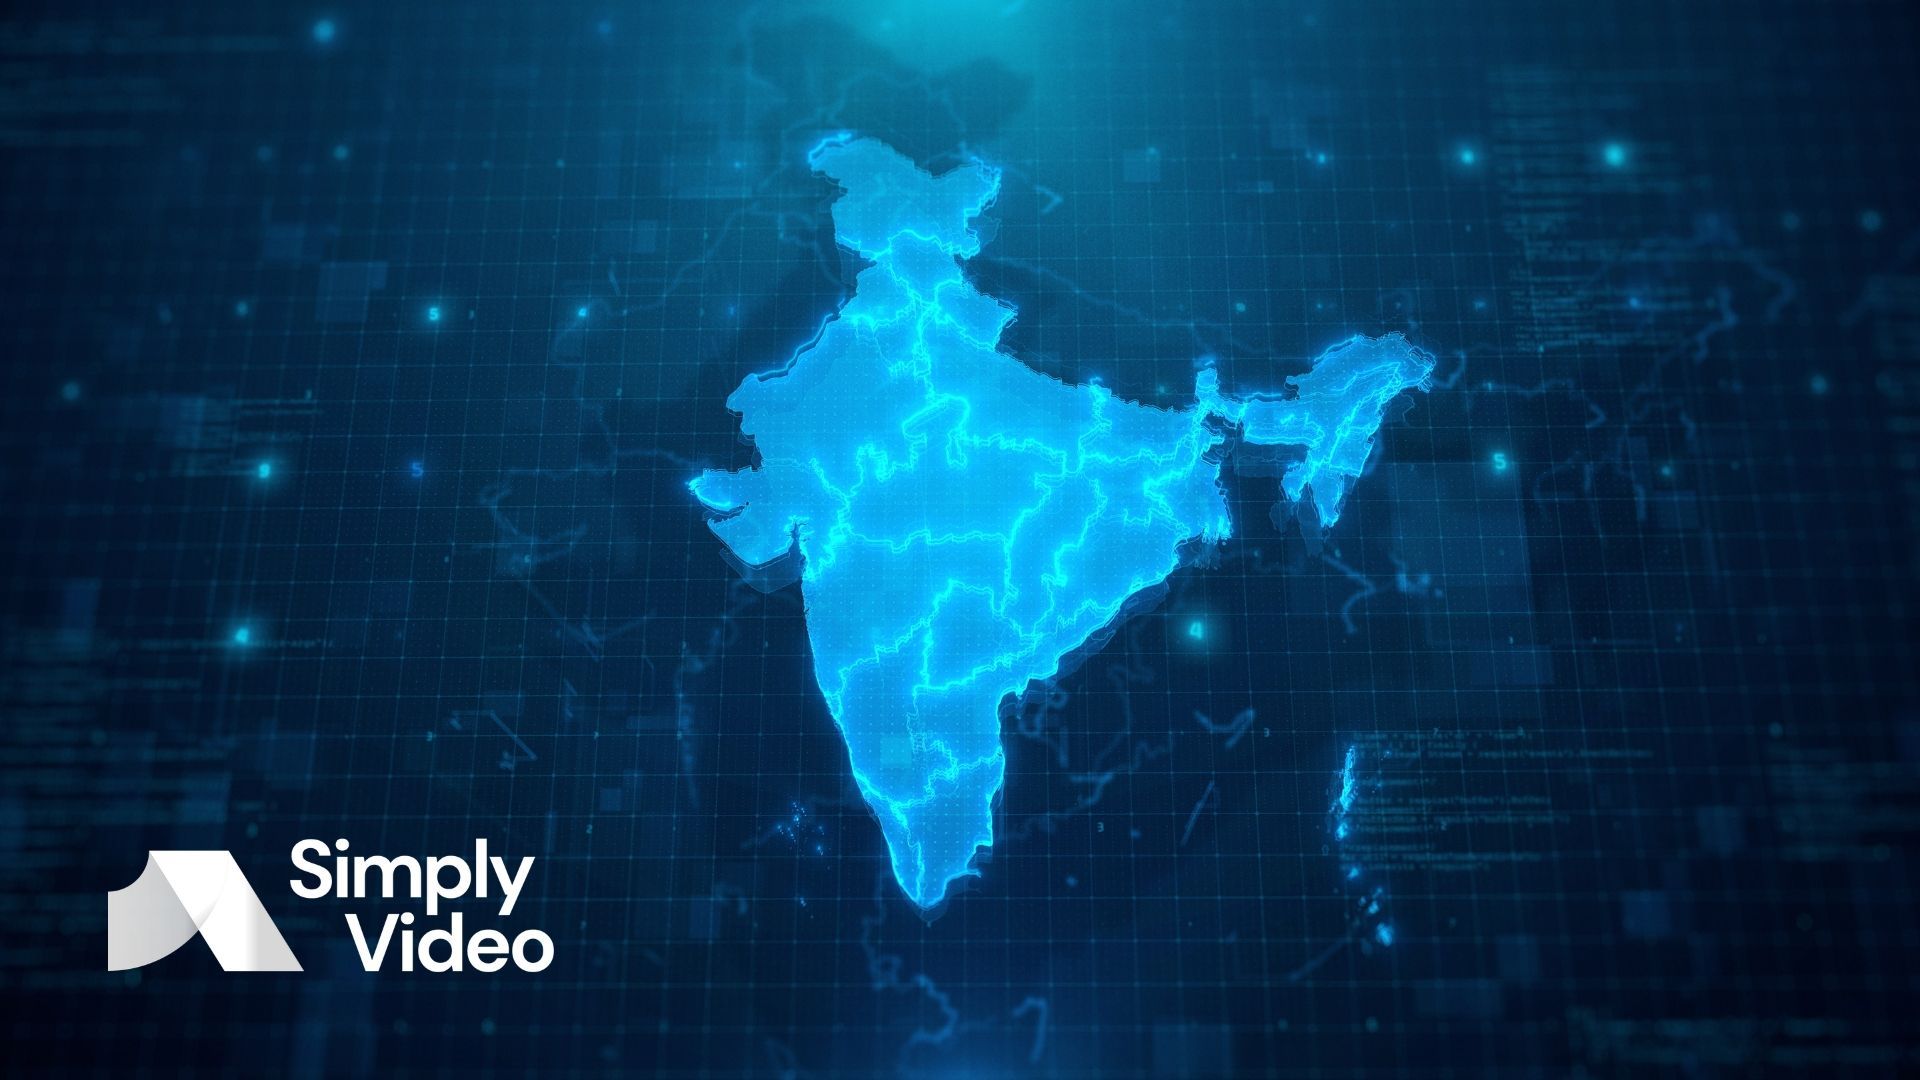 XR adoption is accelerating across the globe – and India is no exception. Learn how XR fits into India's ever-growing economy.